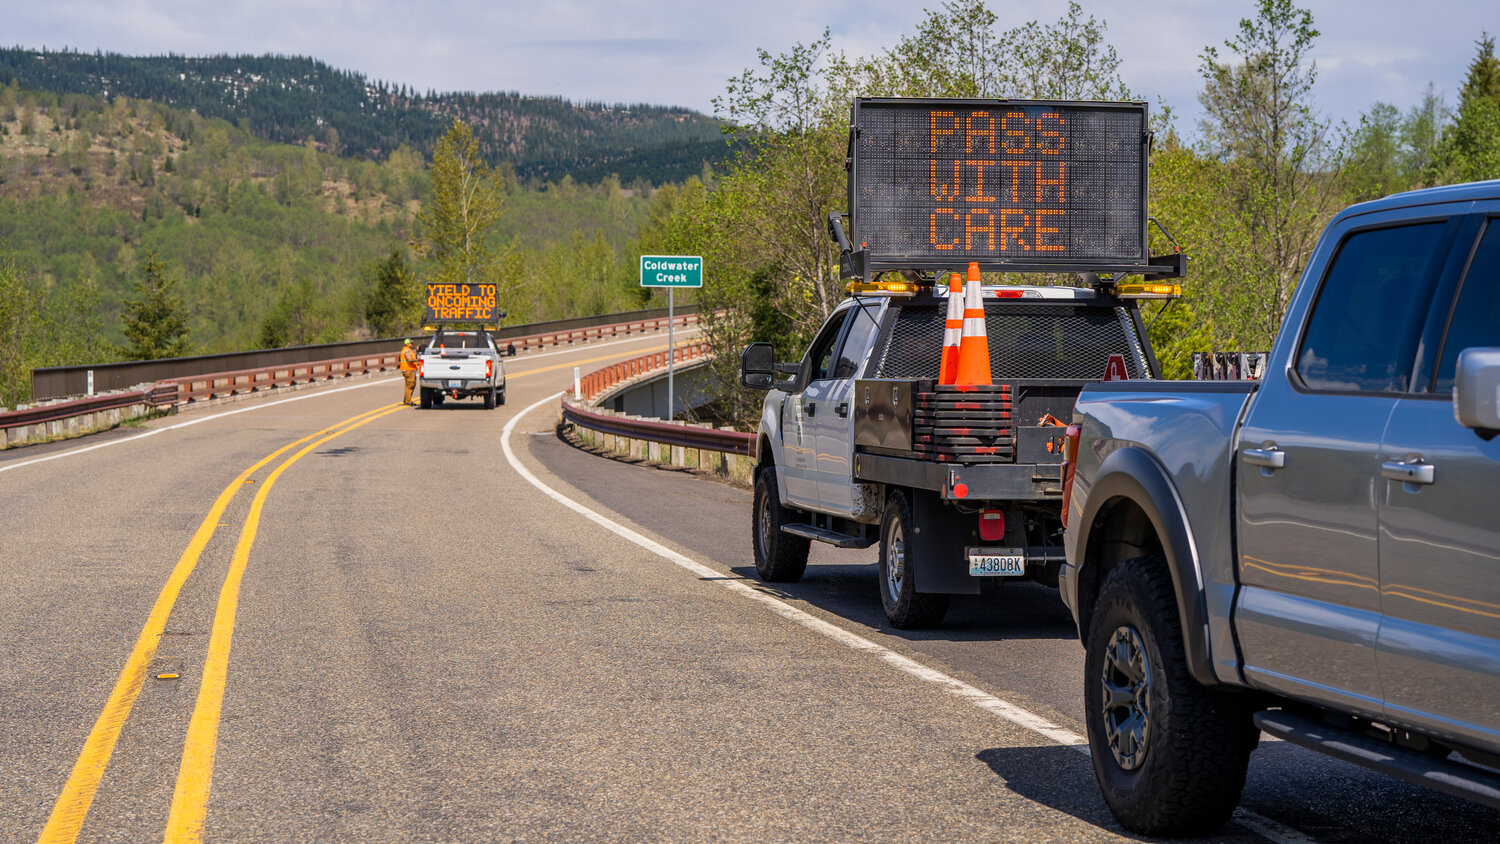 Washington State Department of Transportation and members of the Washington State Patrol respond to the scene of a landslide along Spirit Lake Highway on Monday, May 15.